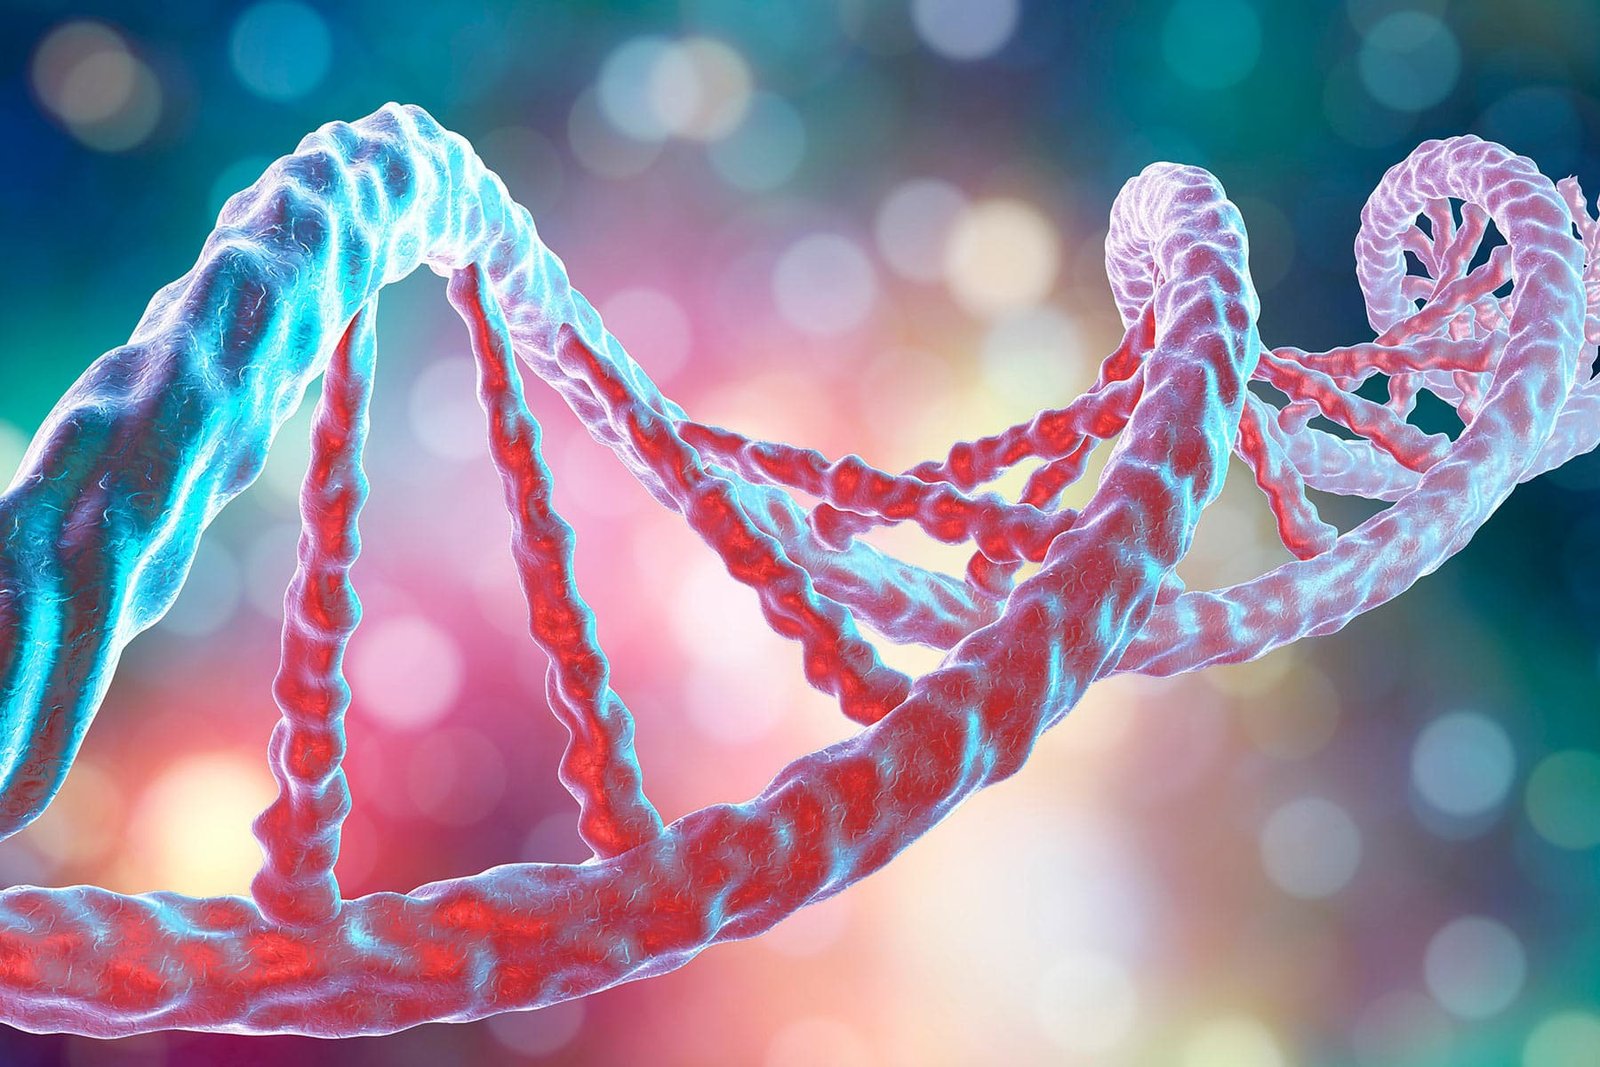 Genes vs. Daily life: Which Issues Extra for Health?